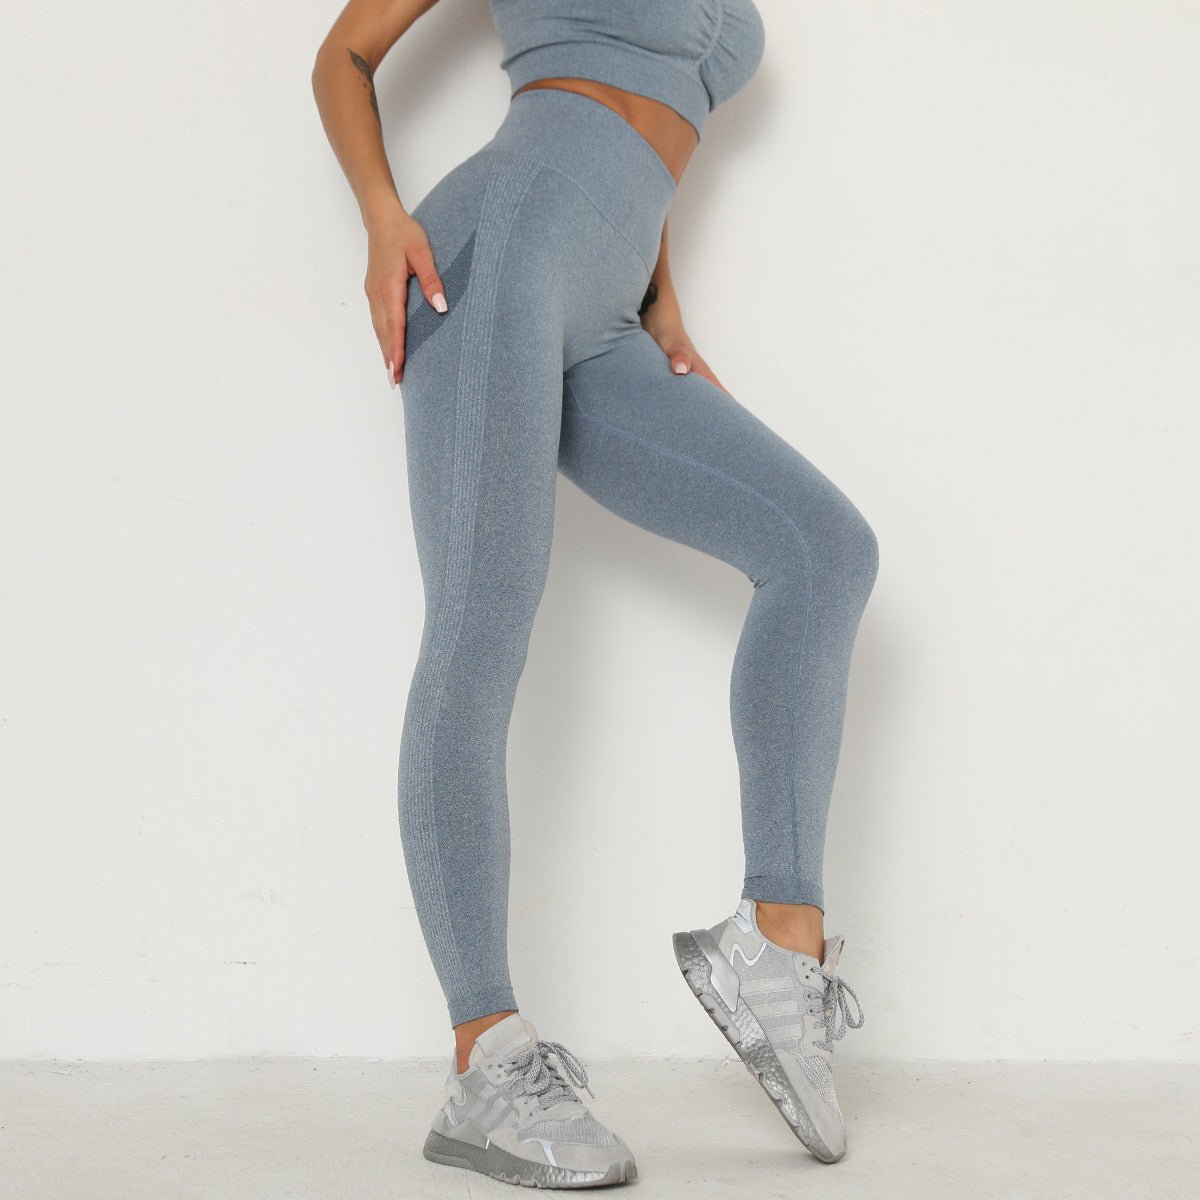 'Jade' Seamless Leggings | Perfect for Gym, Working Out, Casual Wear ...